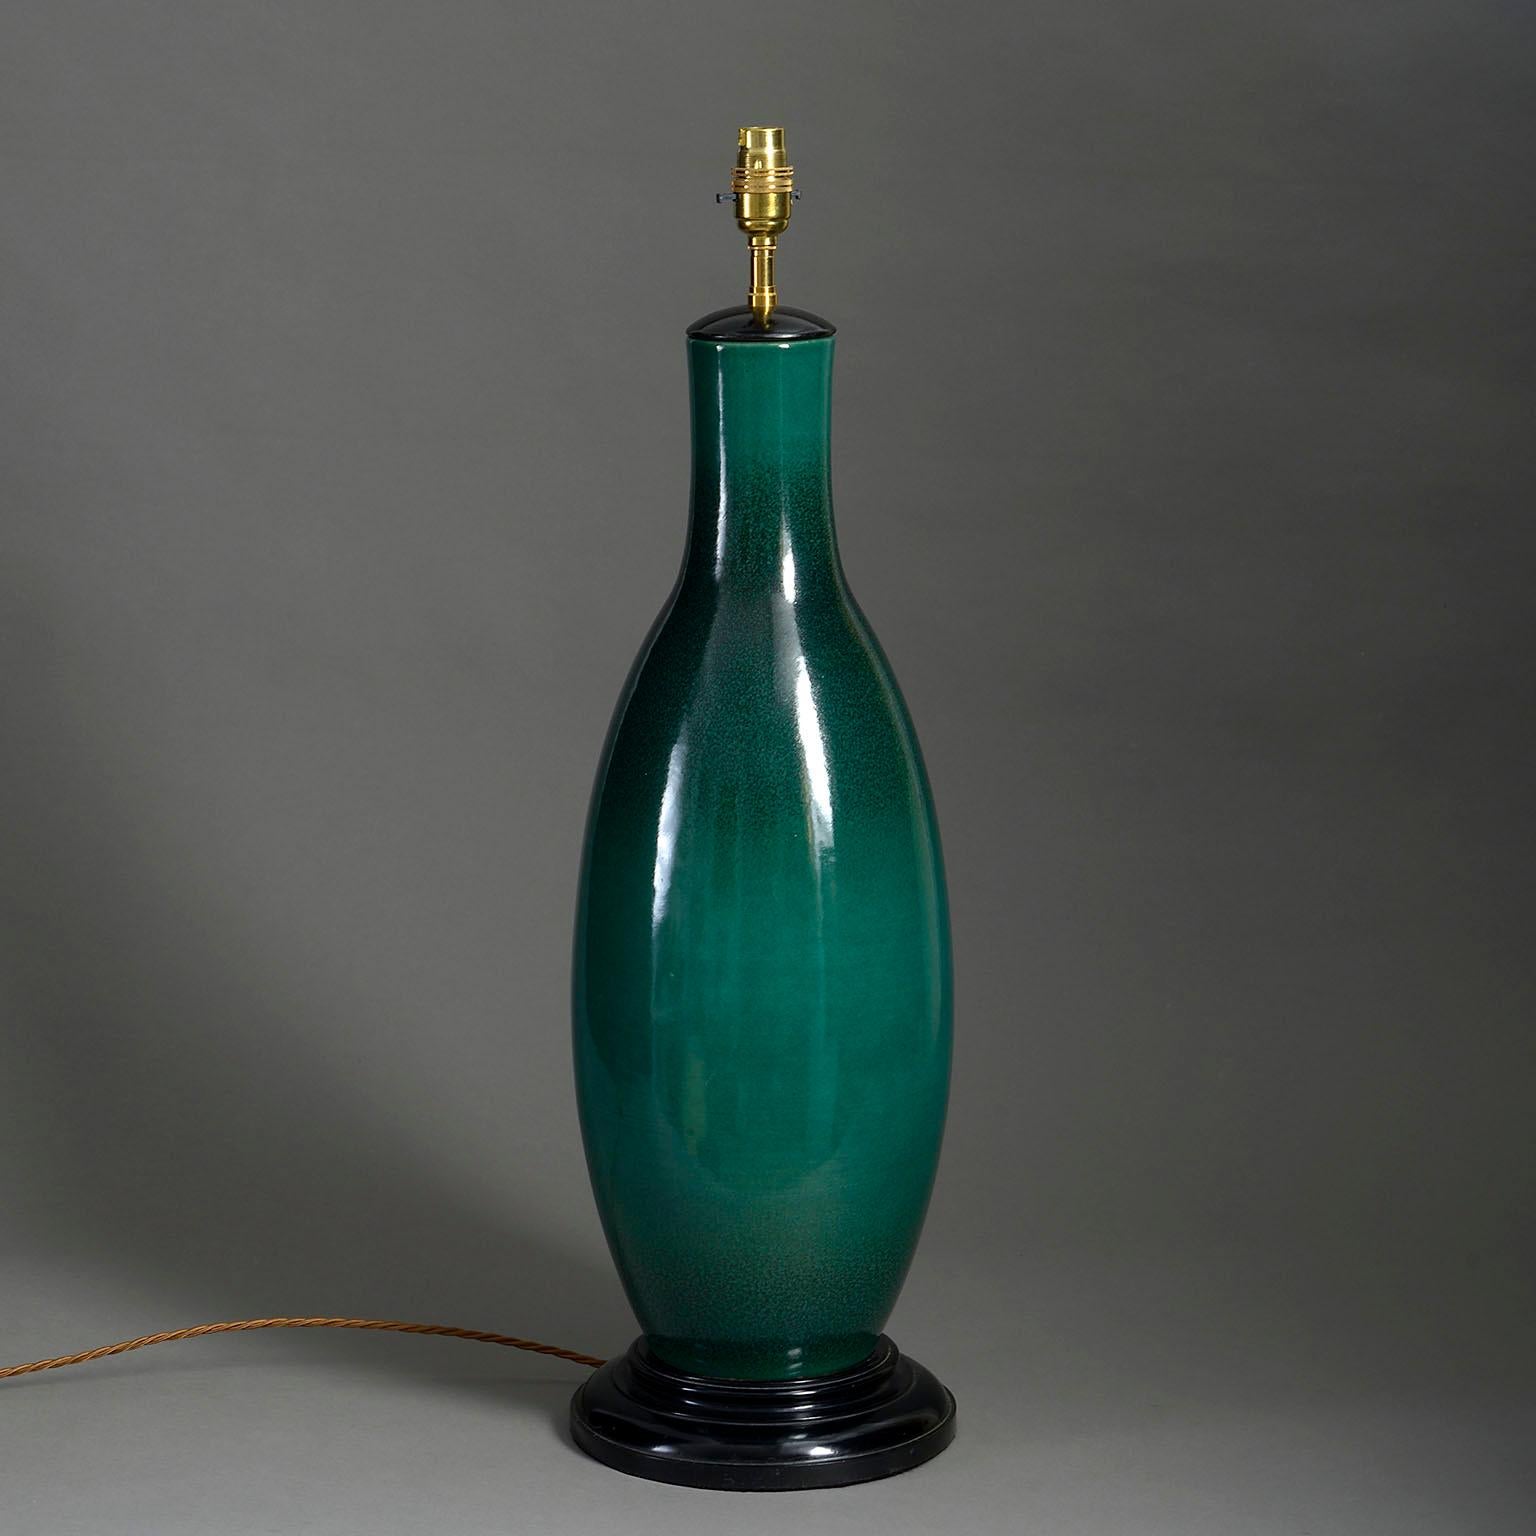 A tall mid-twentieth century deep green glazed vase of elongated bottle form, mounted upon a turned ebonised base as a table lamp.

Dimensions refer to vase and ebonised base only.

Wired to UK standards. This vase can be rewired to all